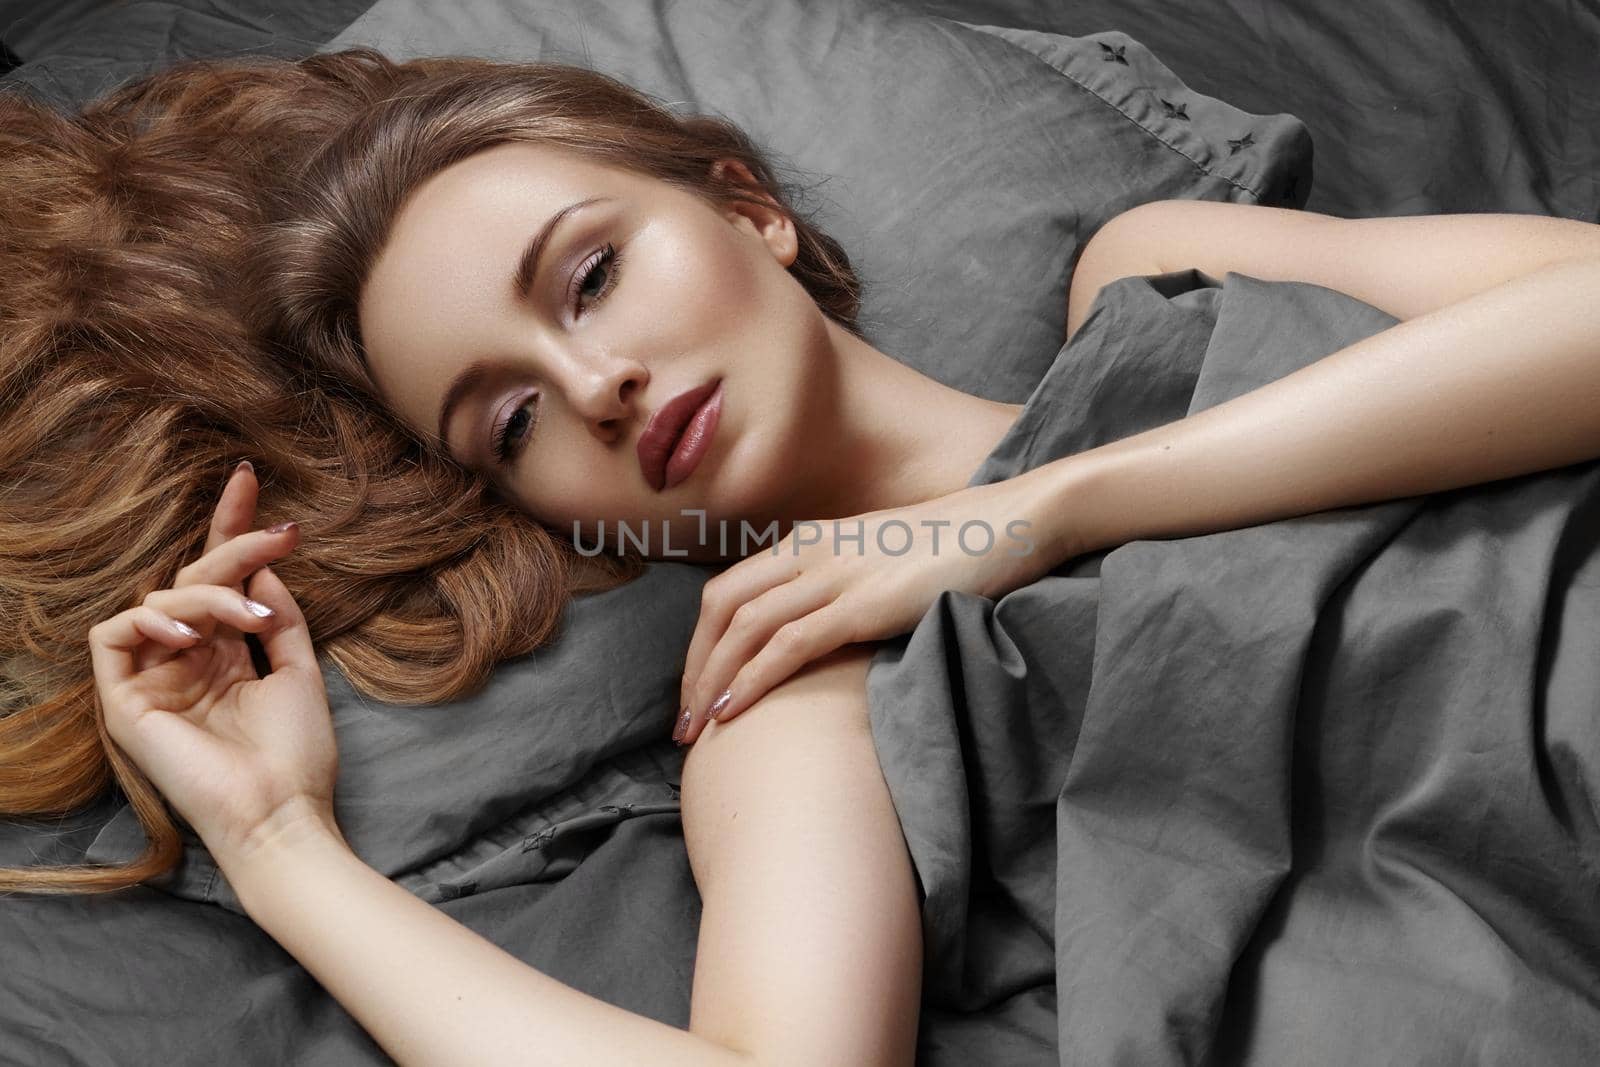 Beautiful Woman Sleeping while lying in Bed with Comfort. Sweet dreams. Sexy model with long curly hair relaxing on grey sheets.